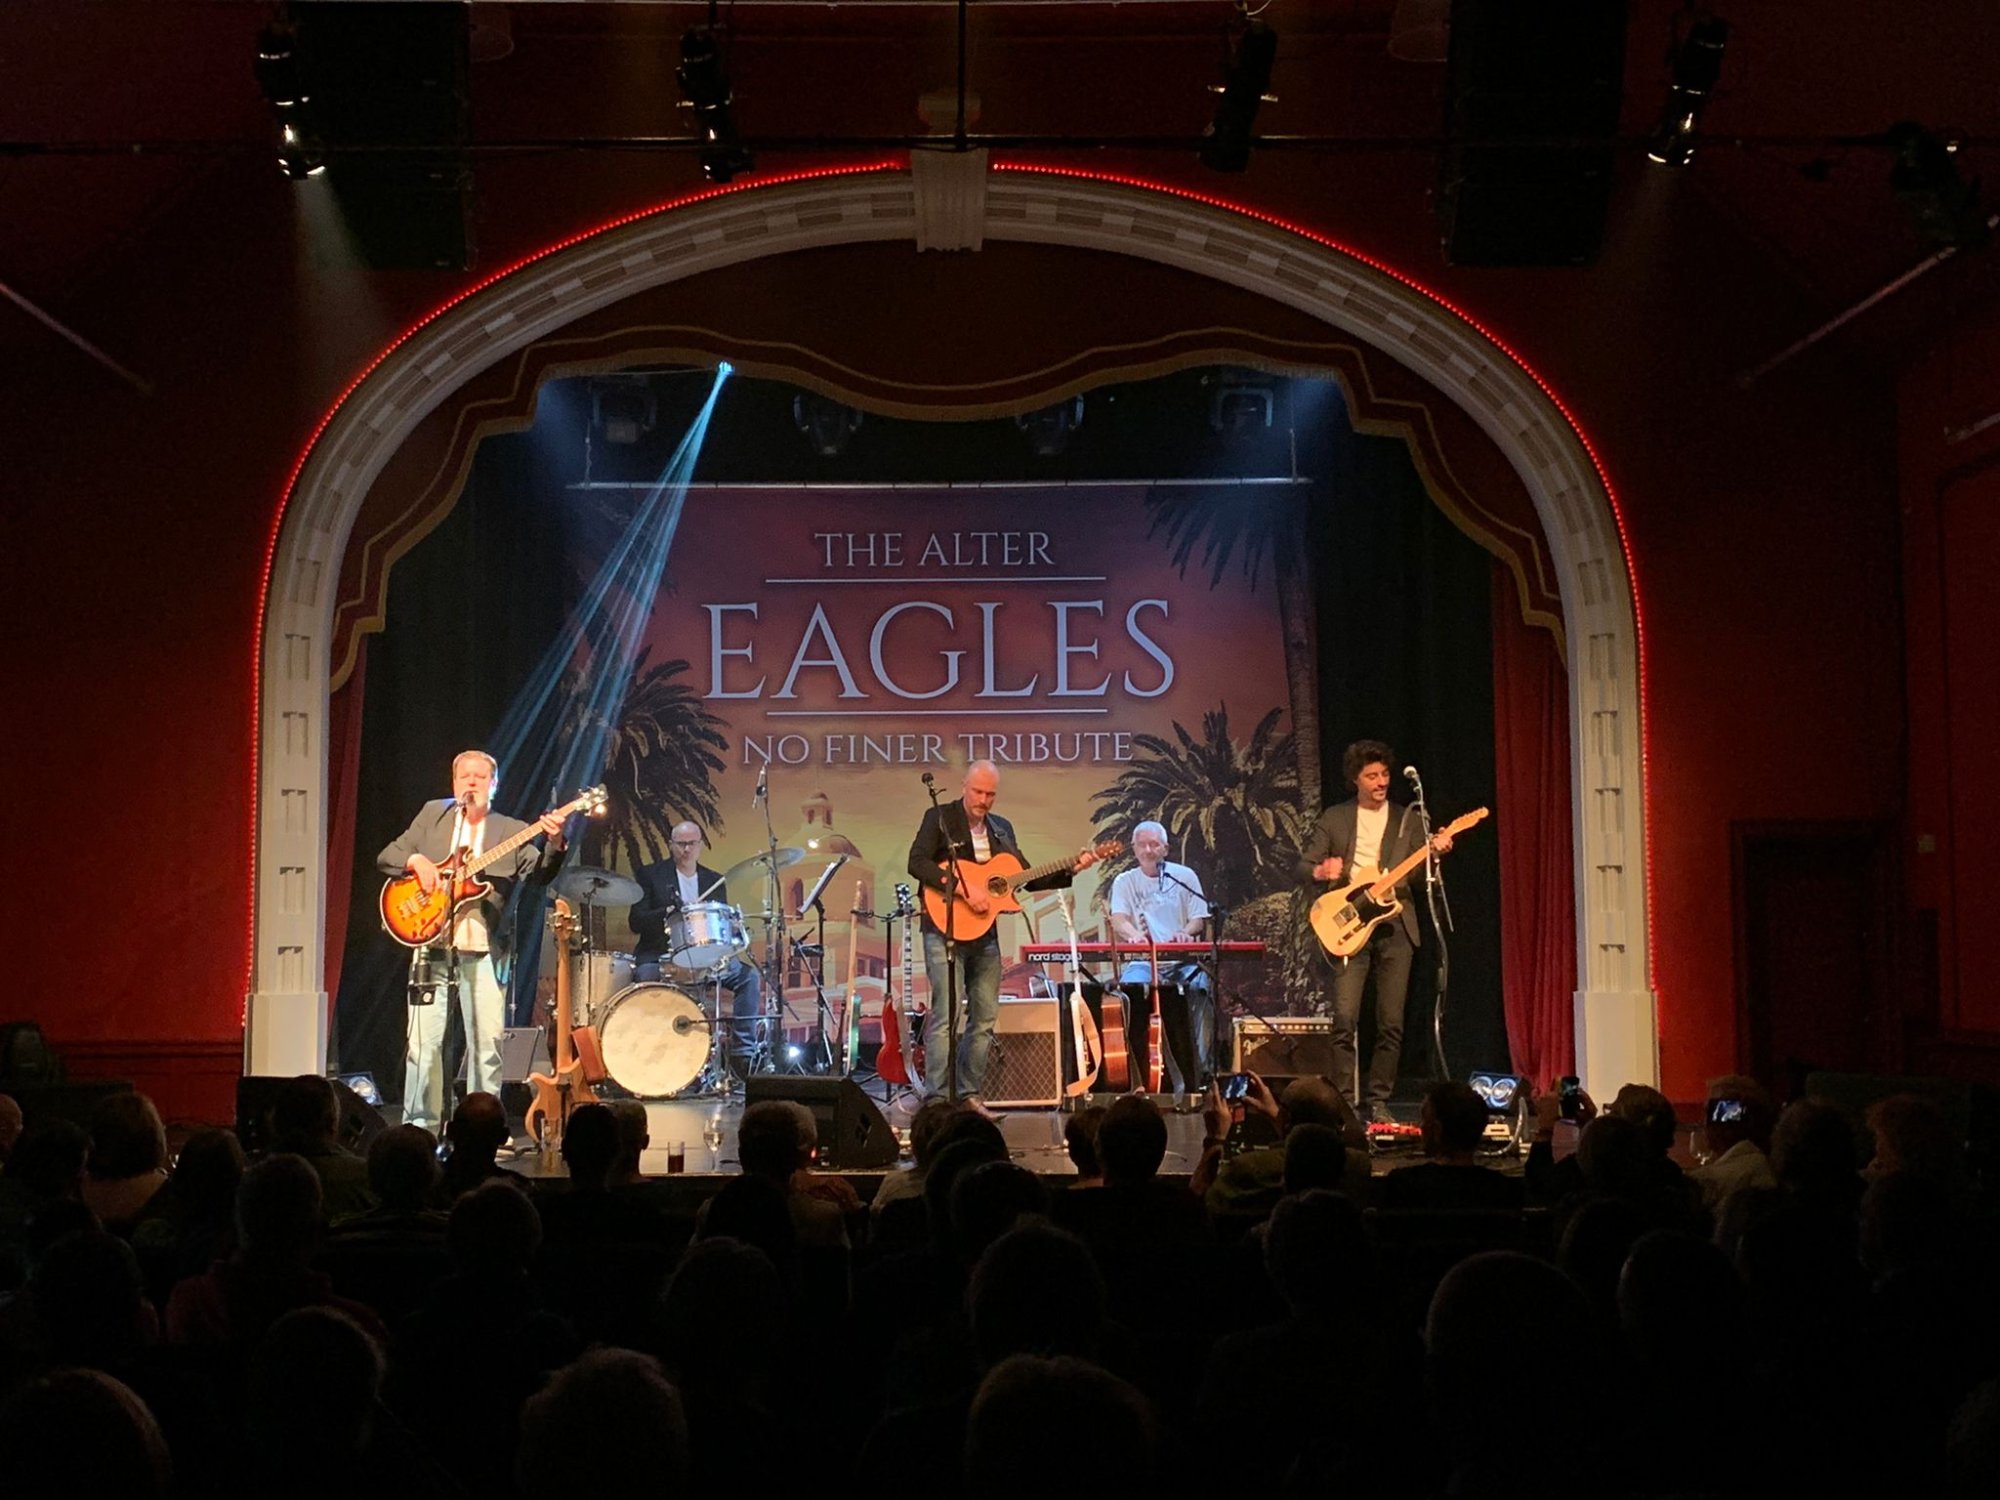 The Alter Eagles live at the Astor